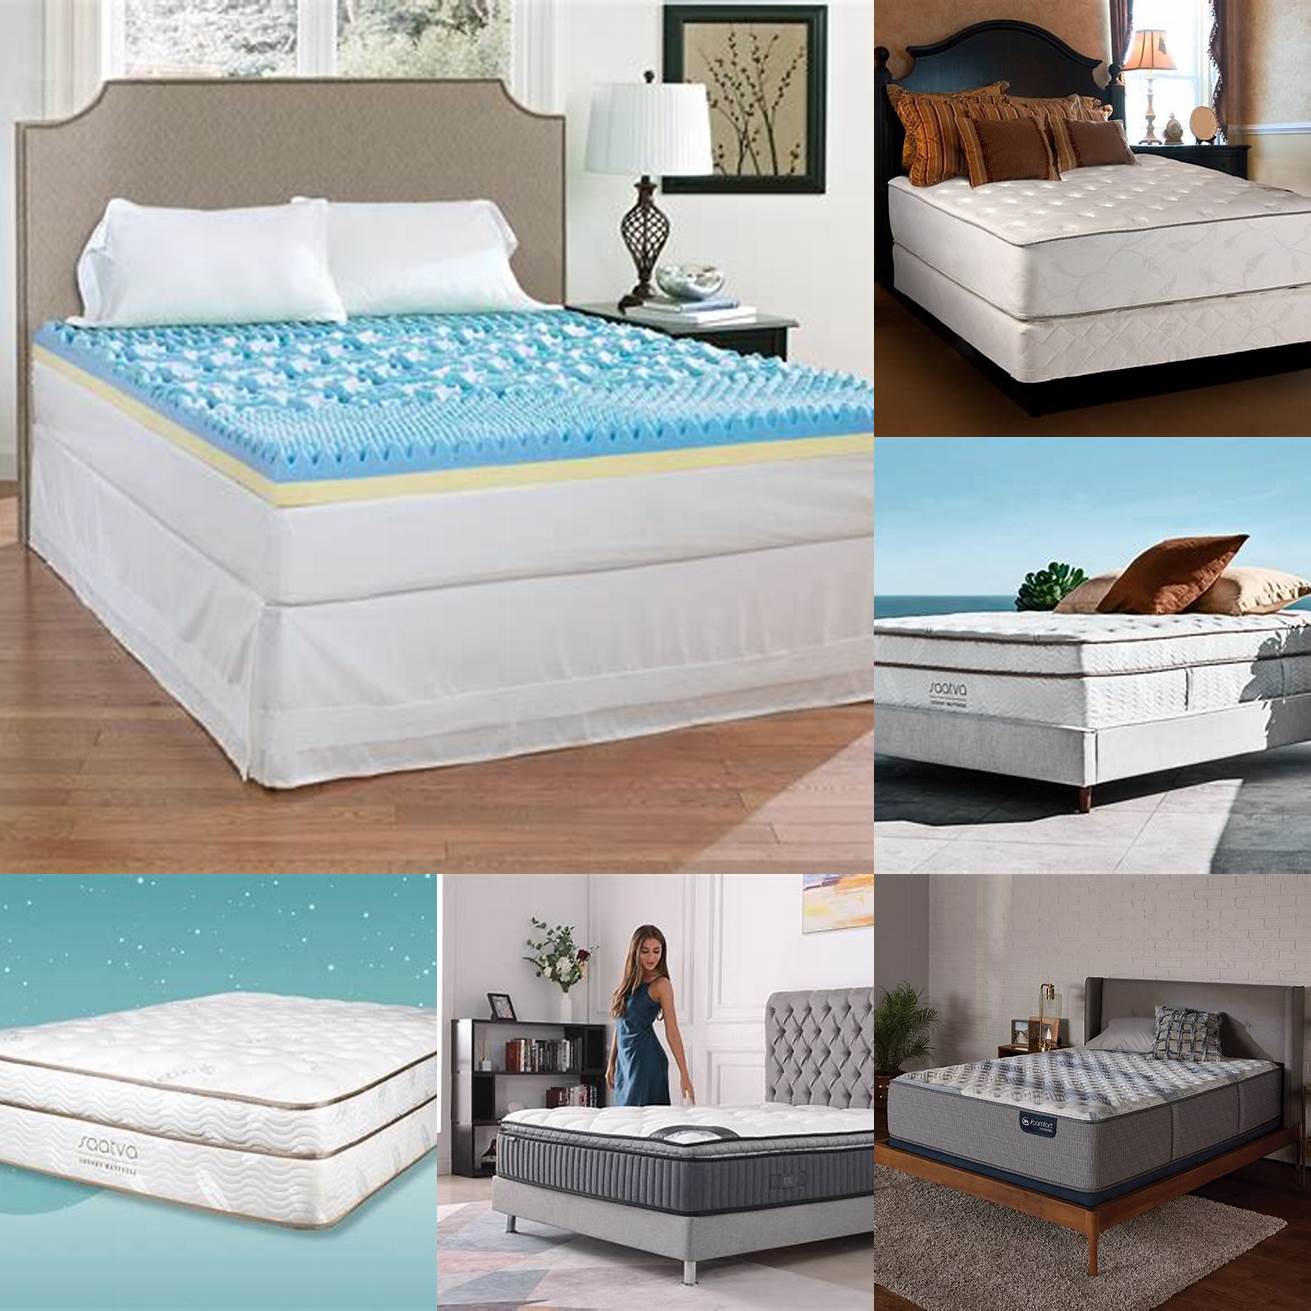 Choose a high-quality mattress that provides adequate support and comfort